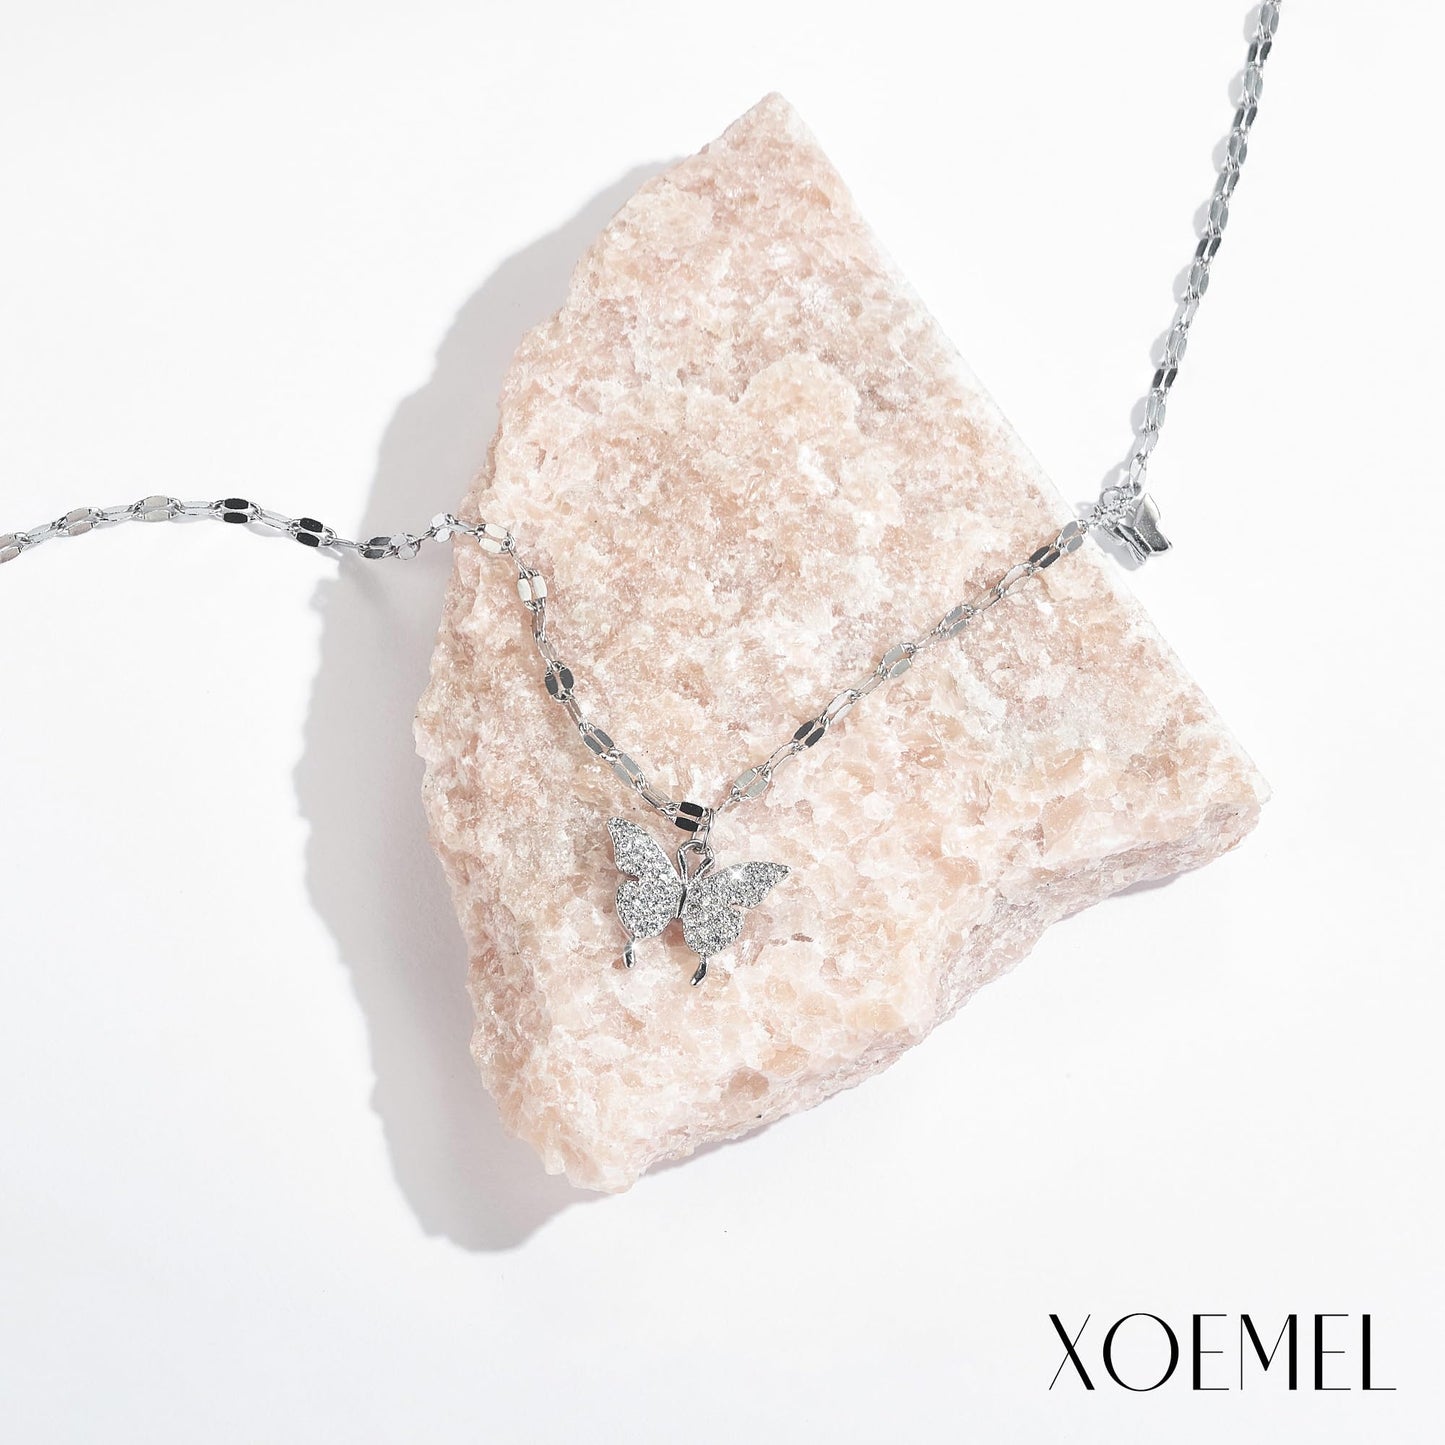 XOEMEL Silver Necklaces for Women,Adjustable Butterfly Layered Necklaces with Cubic Zirconia Dainty Sterling Silver Necklace Silver Chain for Girls Jewellery Gift